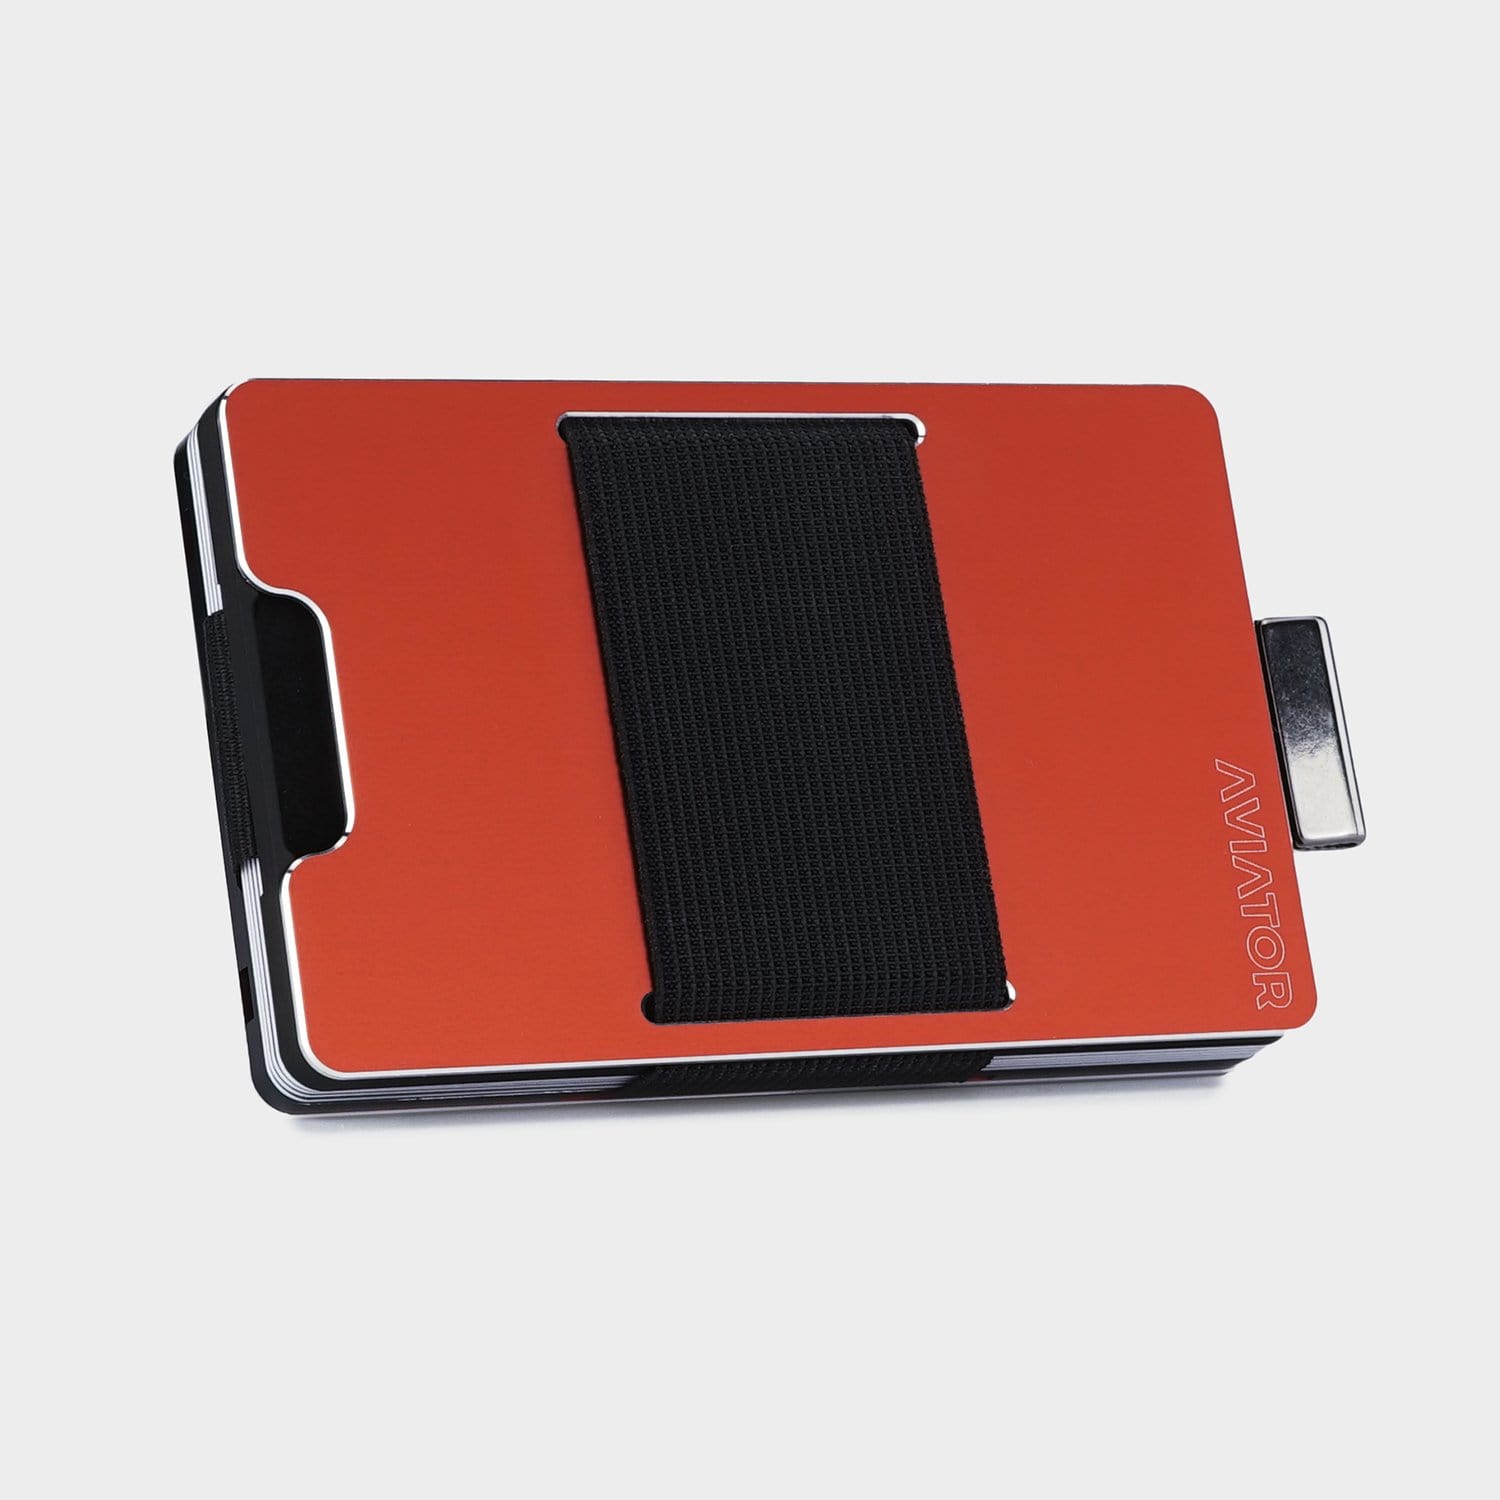 NOT FLAW[LESS] Imola Red Aluminum Slim Wallet